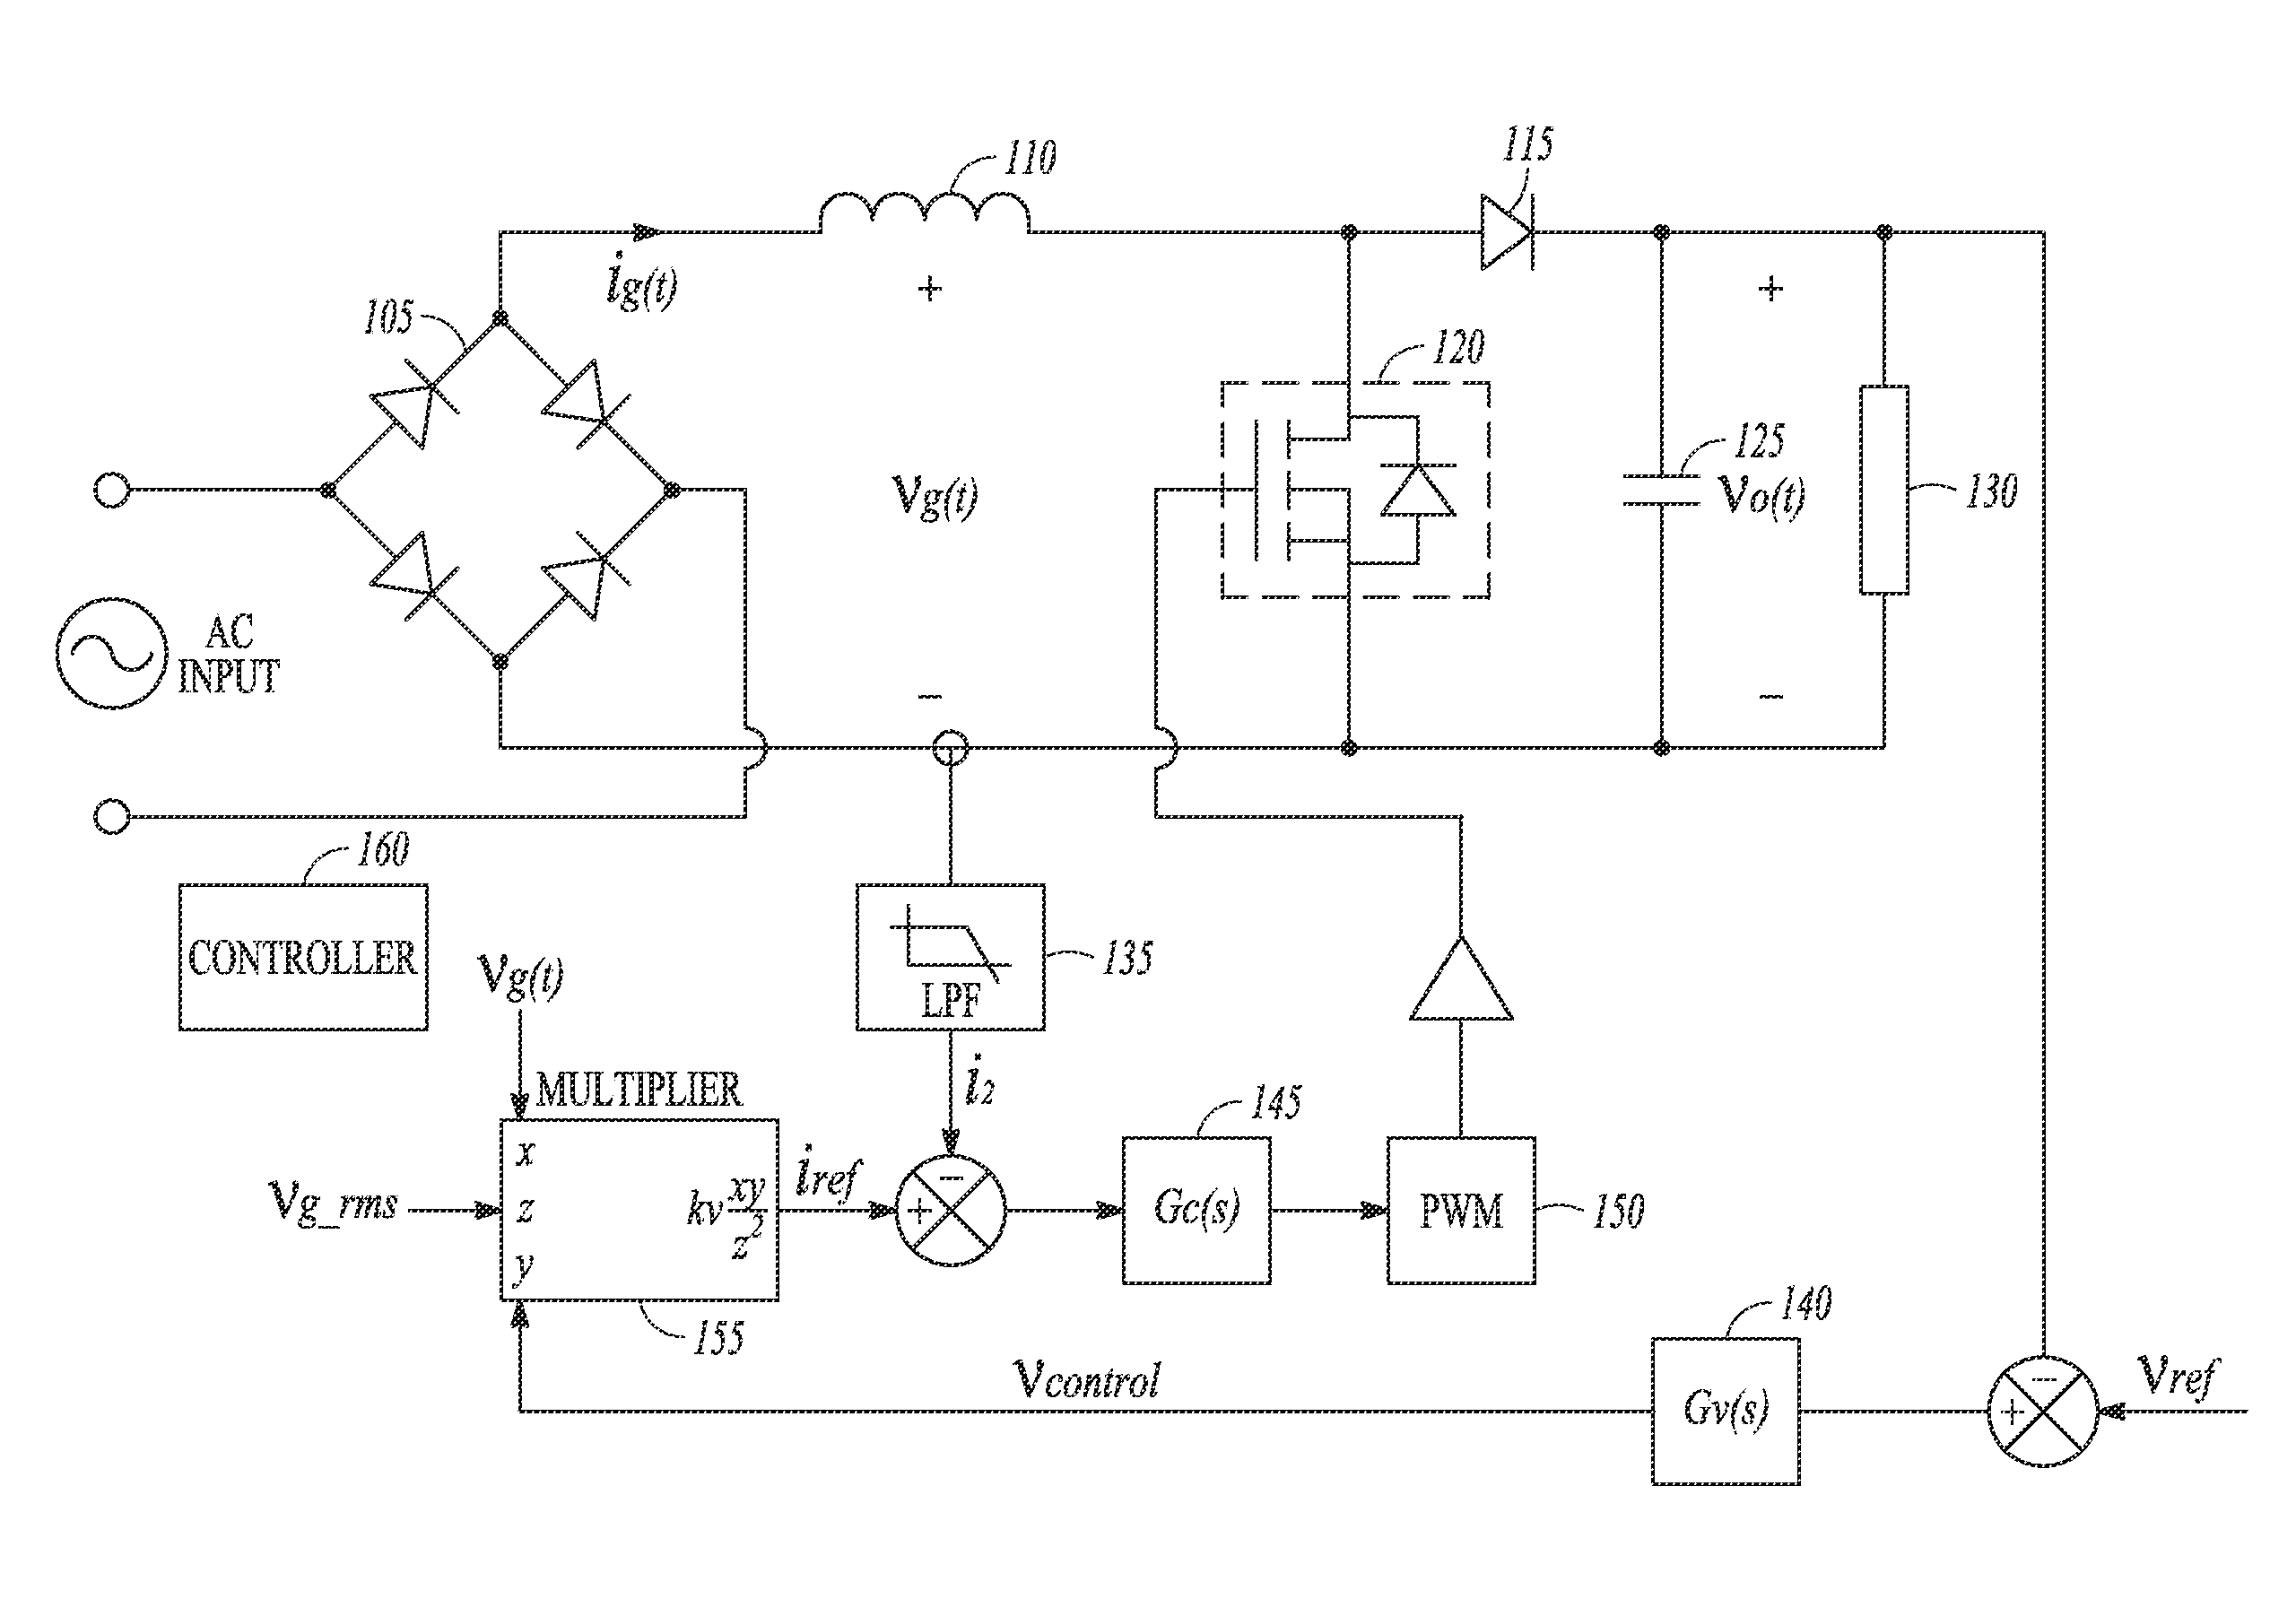 Auto-tuning current loop compensation for power factor correction controller